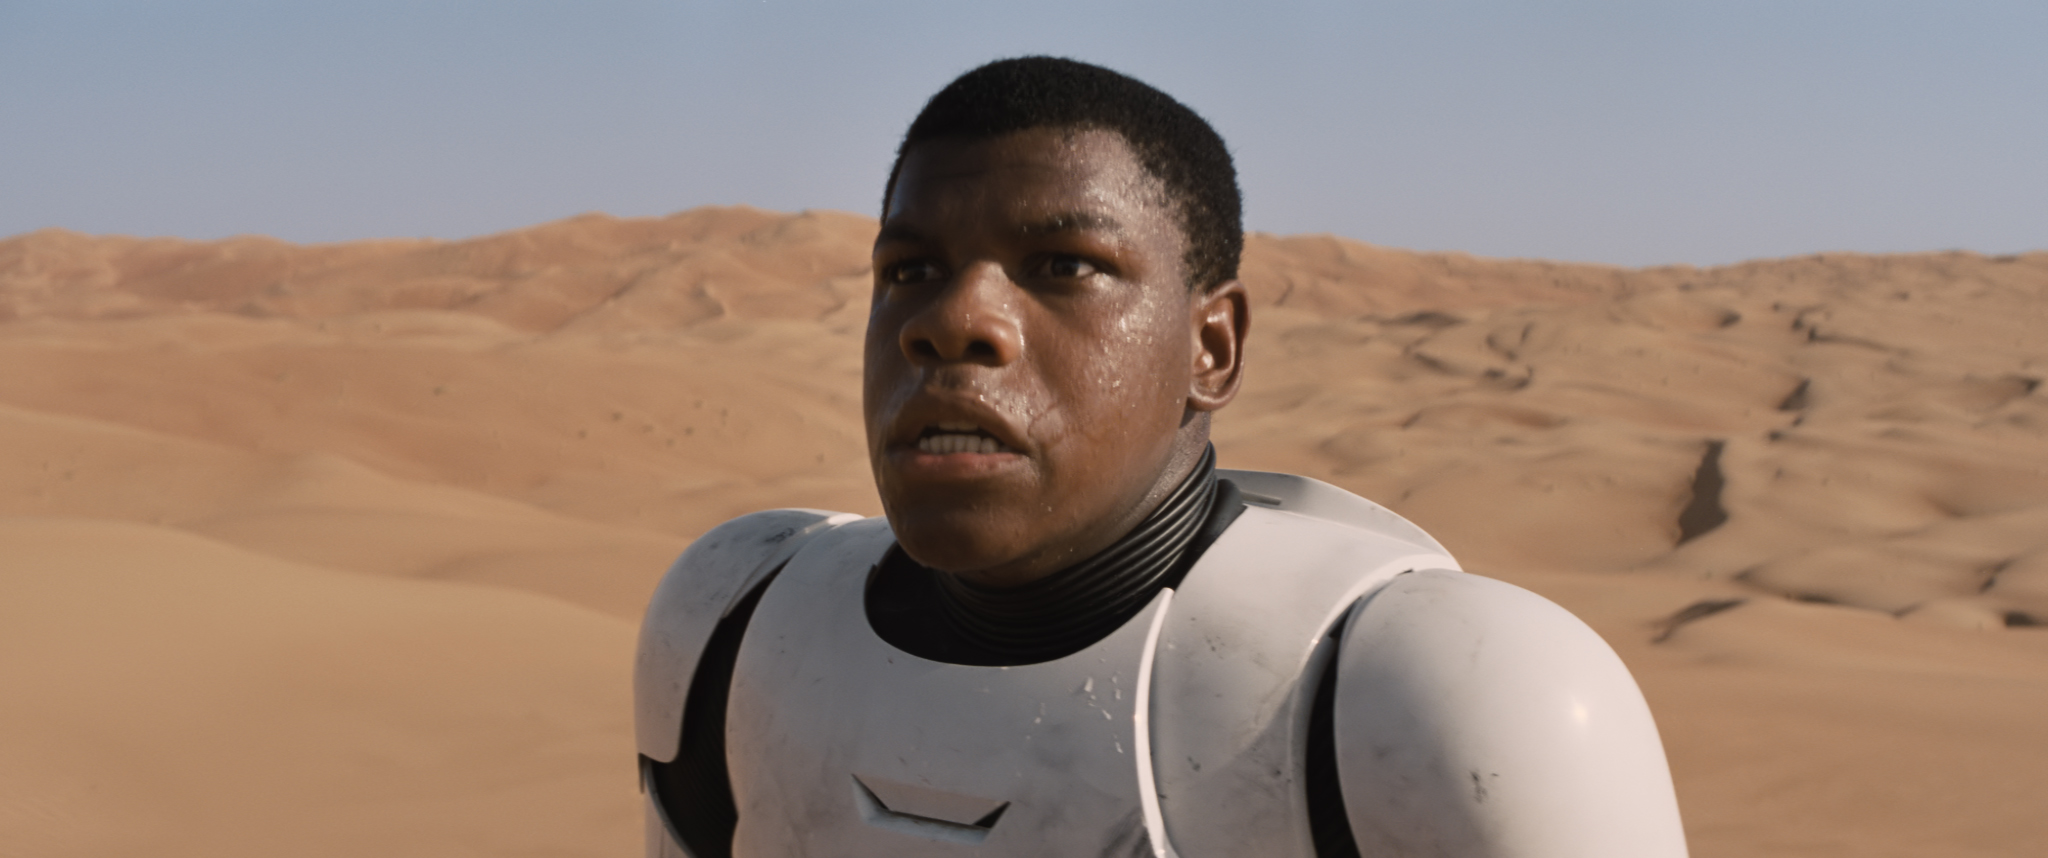 There Will Be No Star Wars: The Force Awakens Footage At D23 Expo